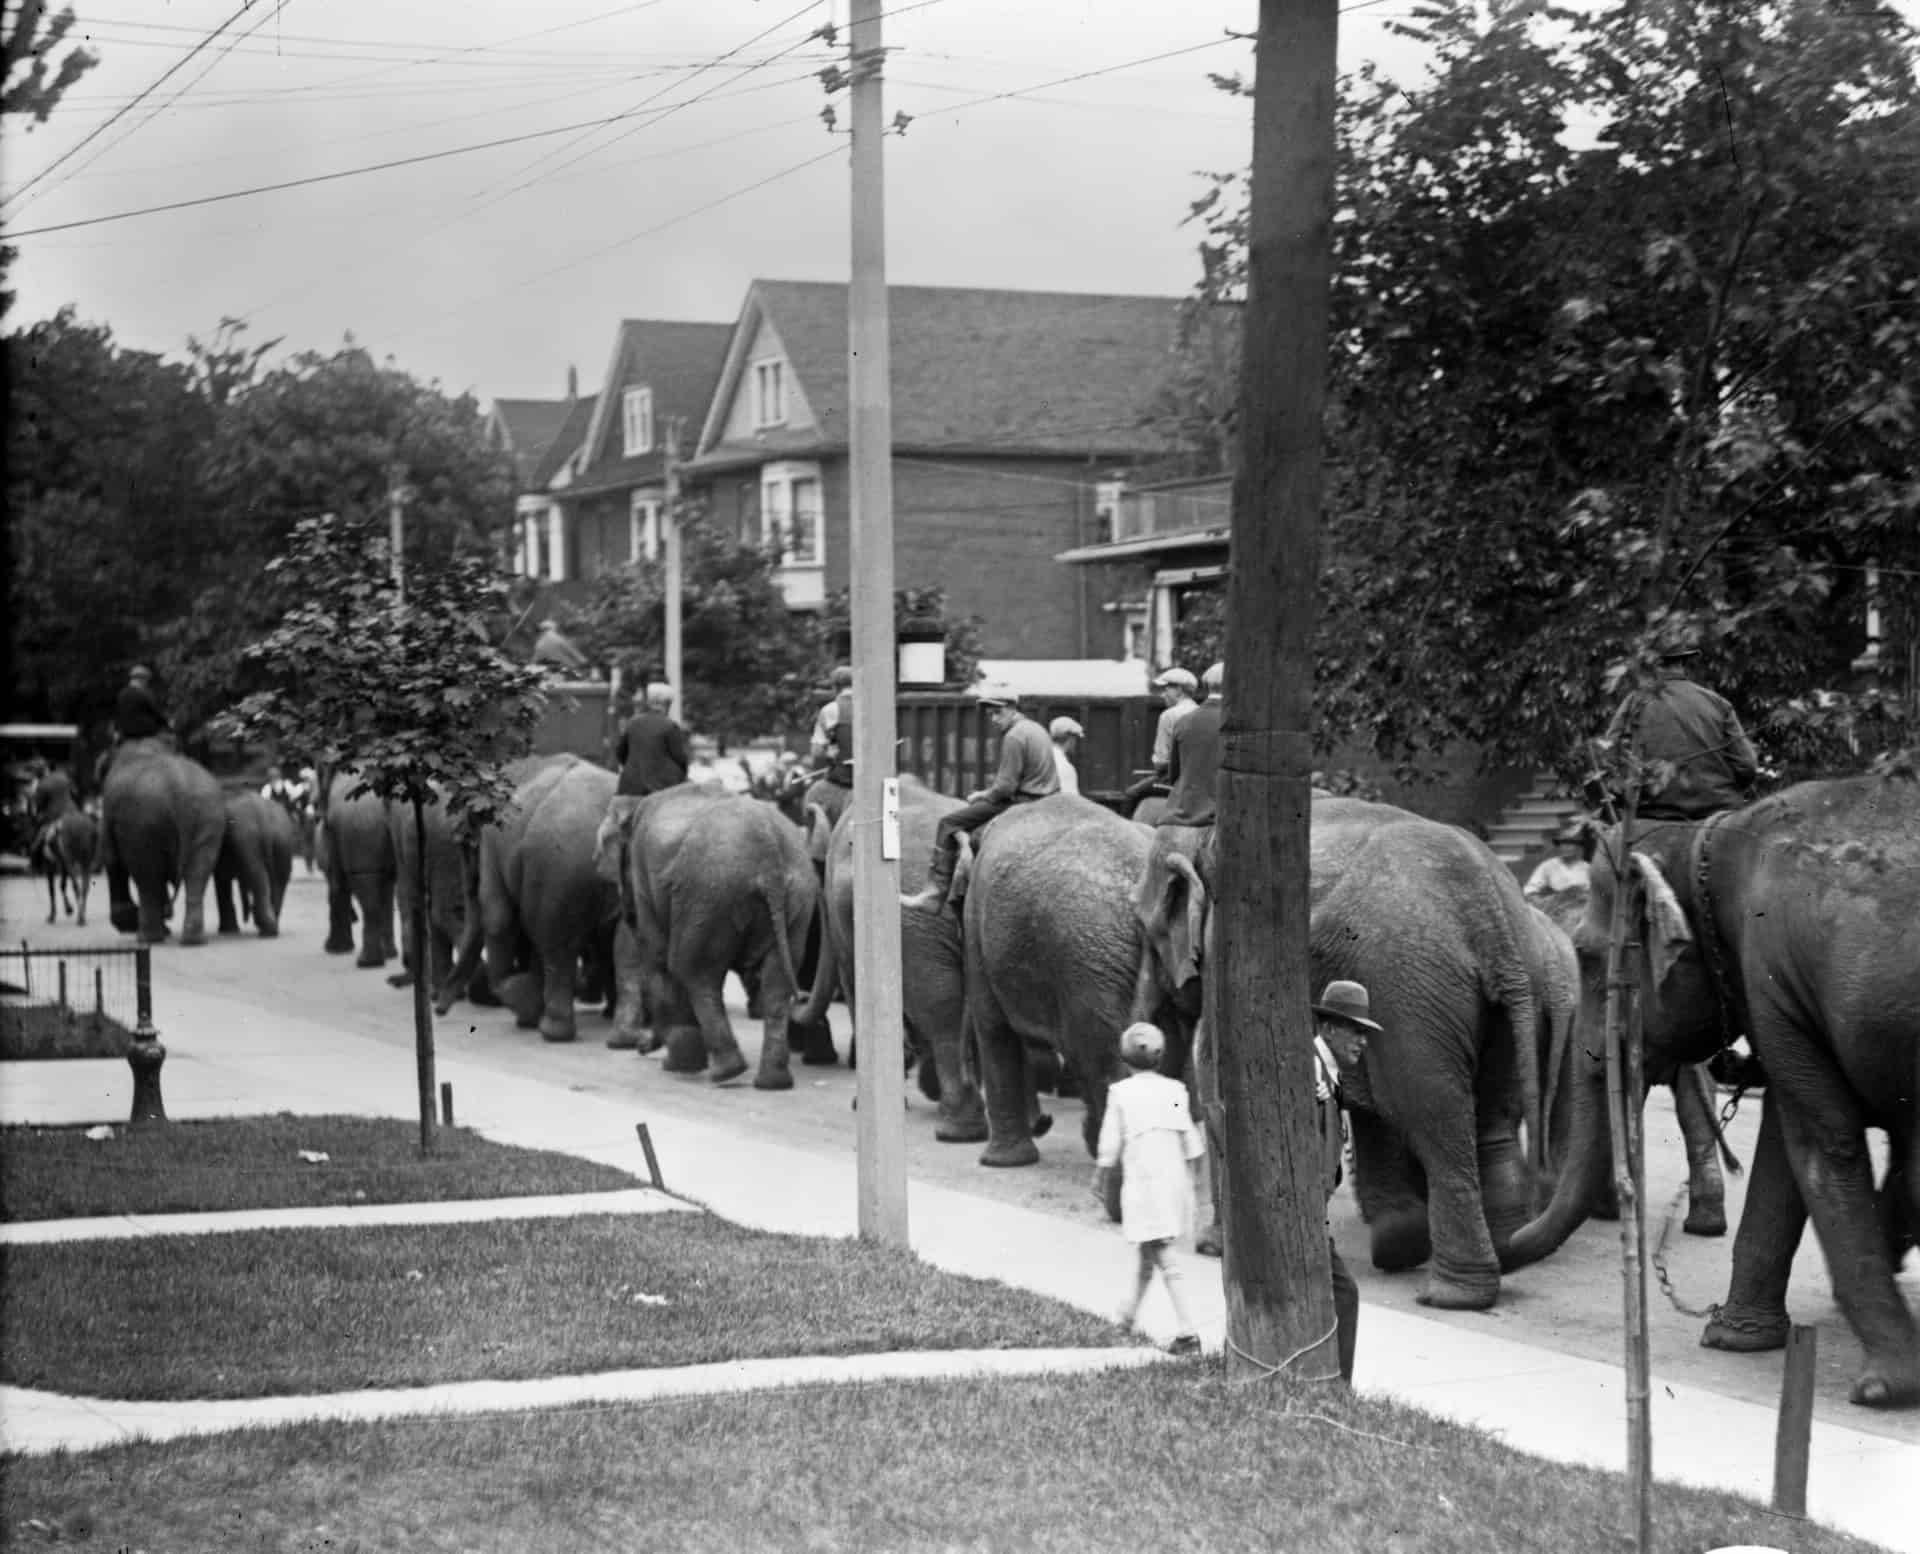 dufferin-elephant-pictures-r-6821